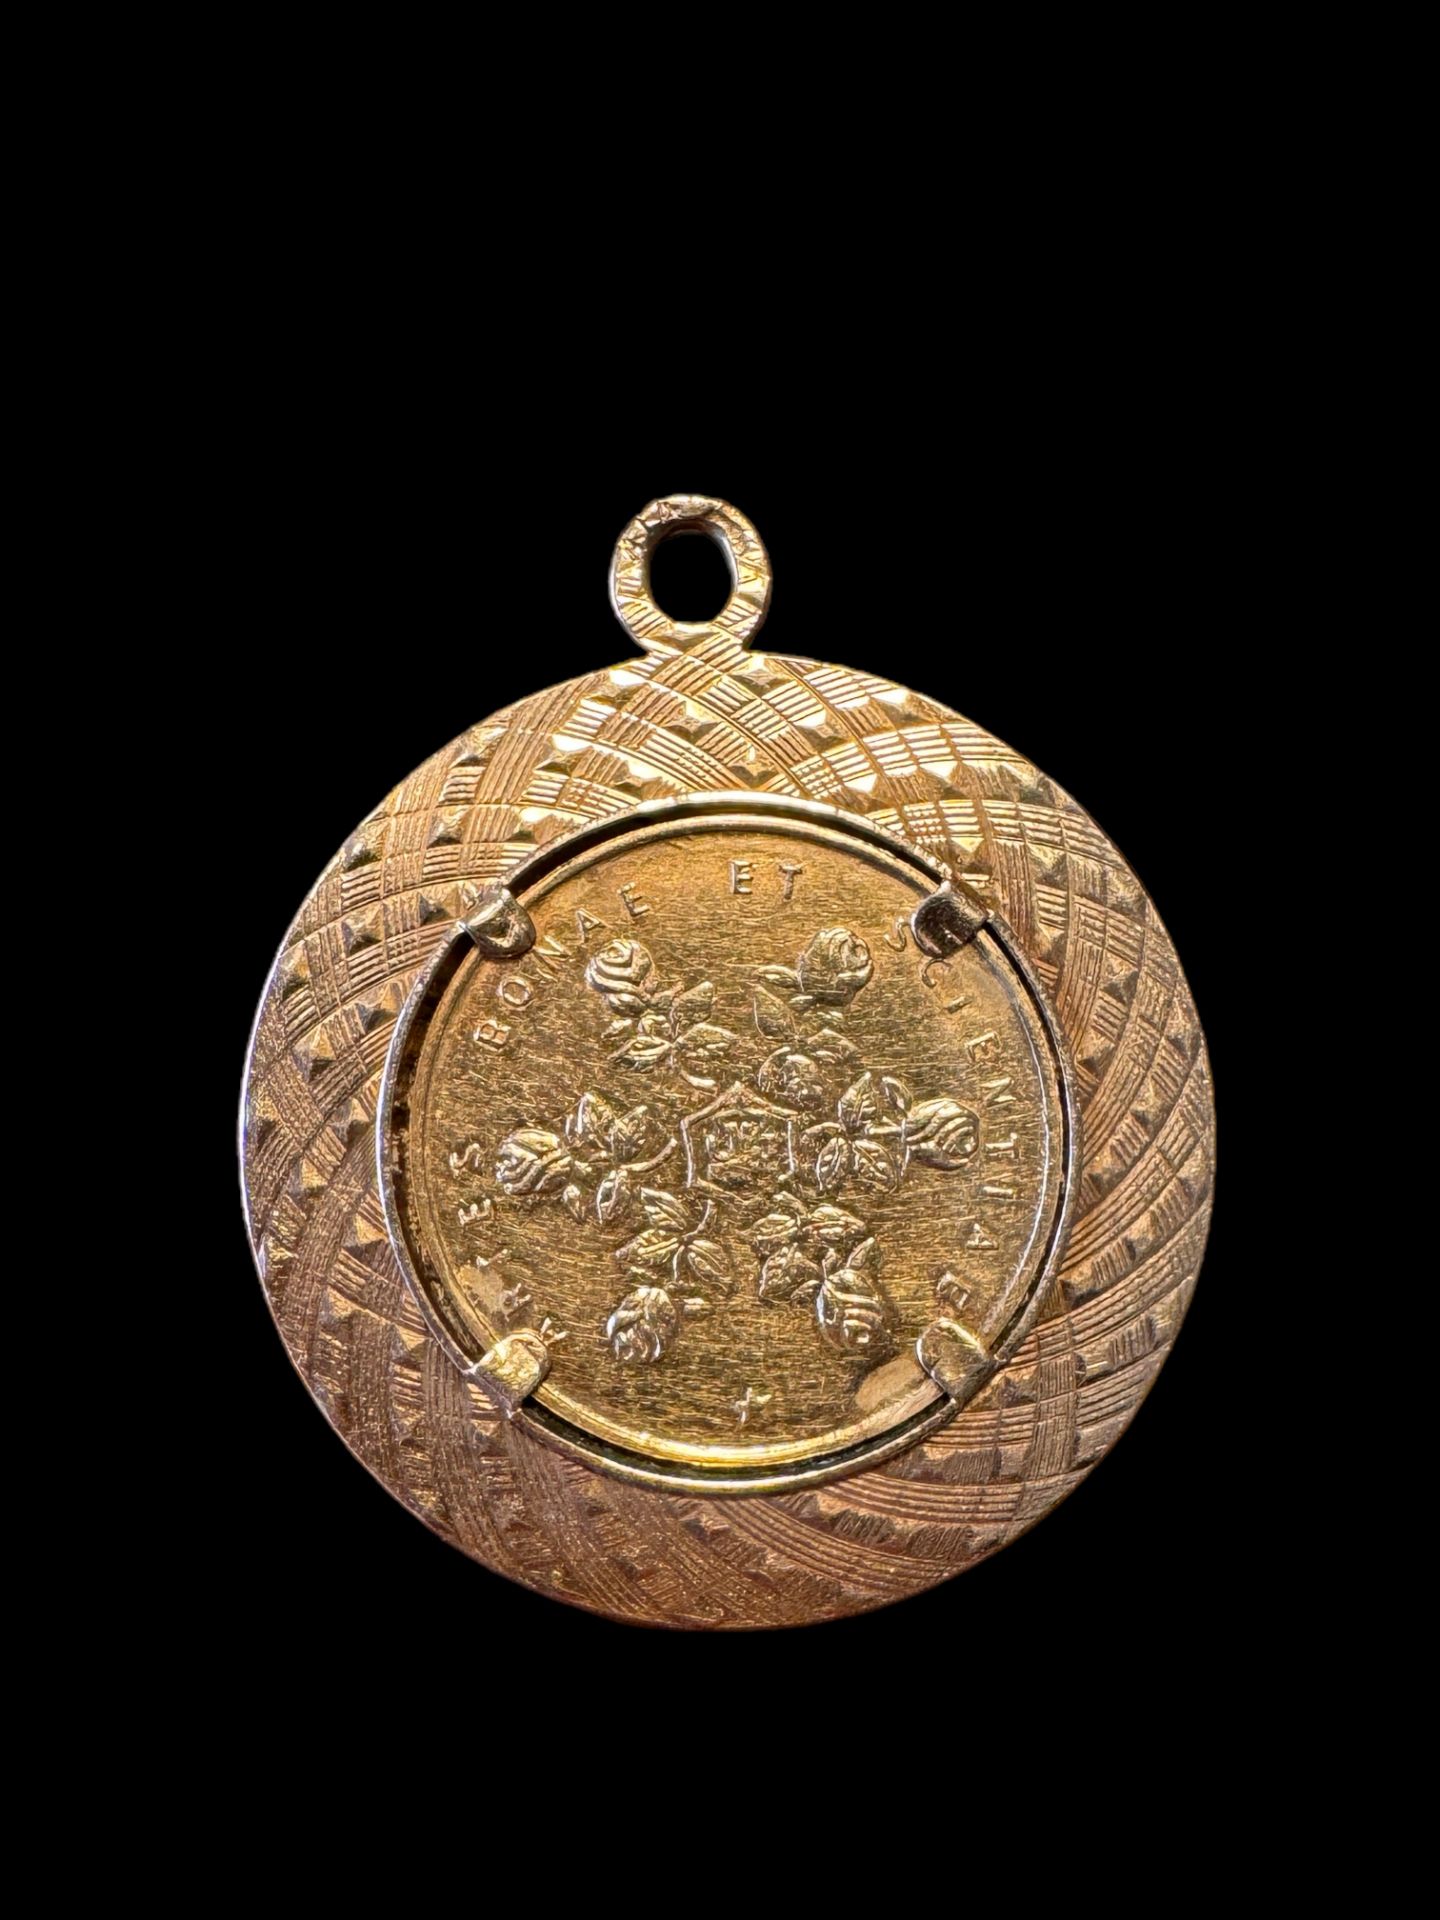 A pendant mounted with a commemorative coin featuring Elizabeth II opposite ‘ARTES BONAE ET SCIENTIA - Image 2 of 2